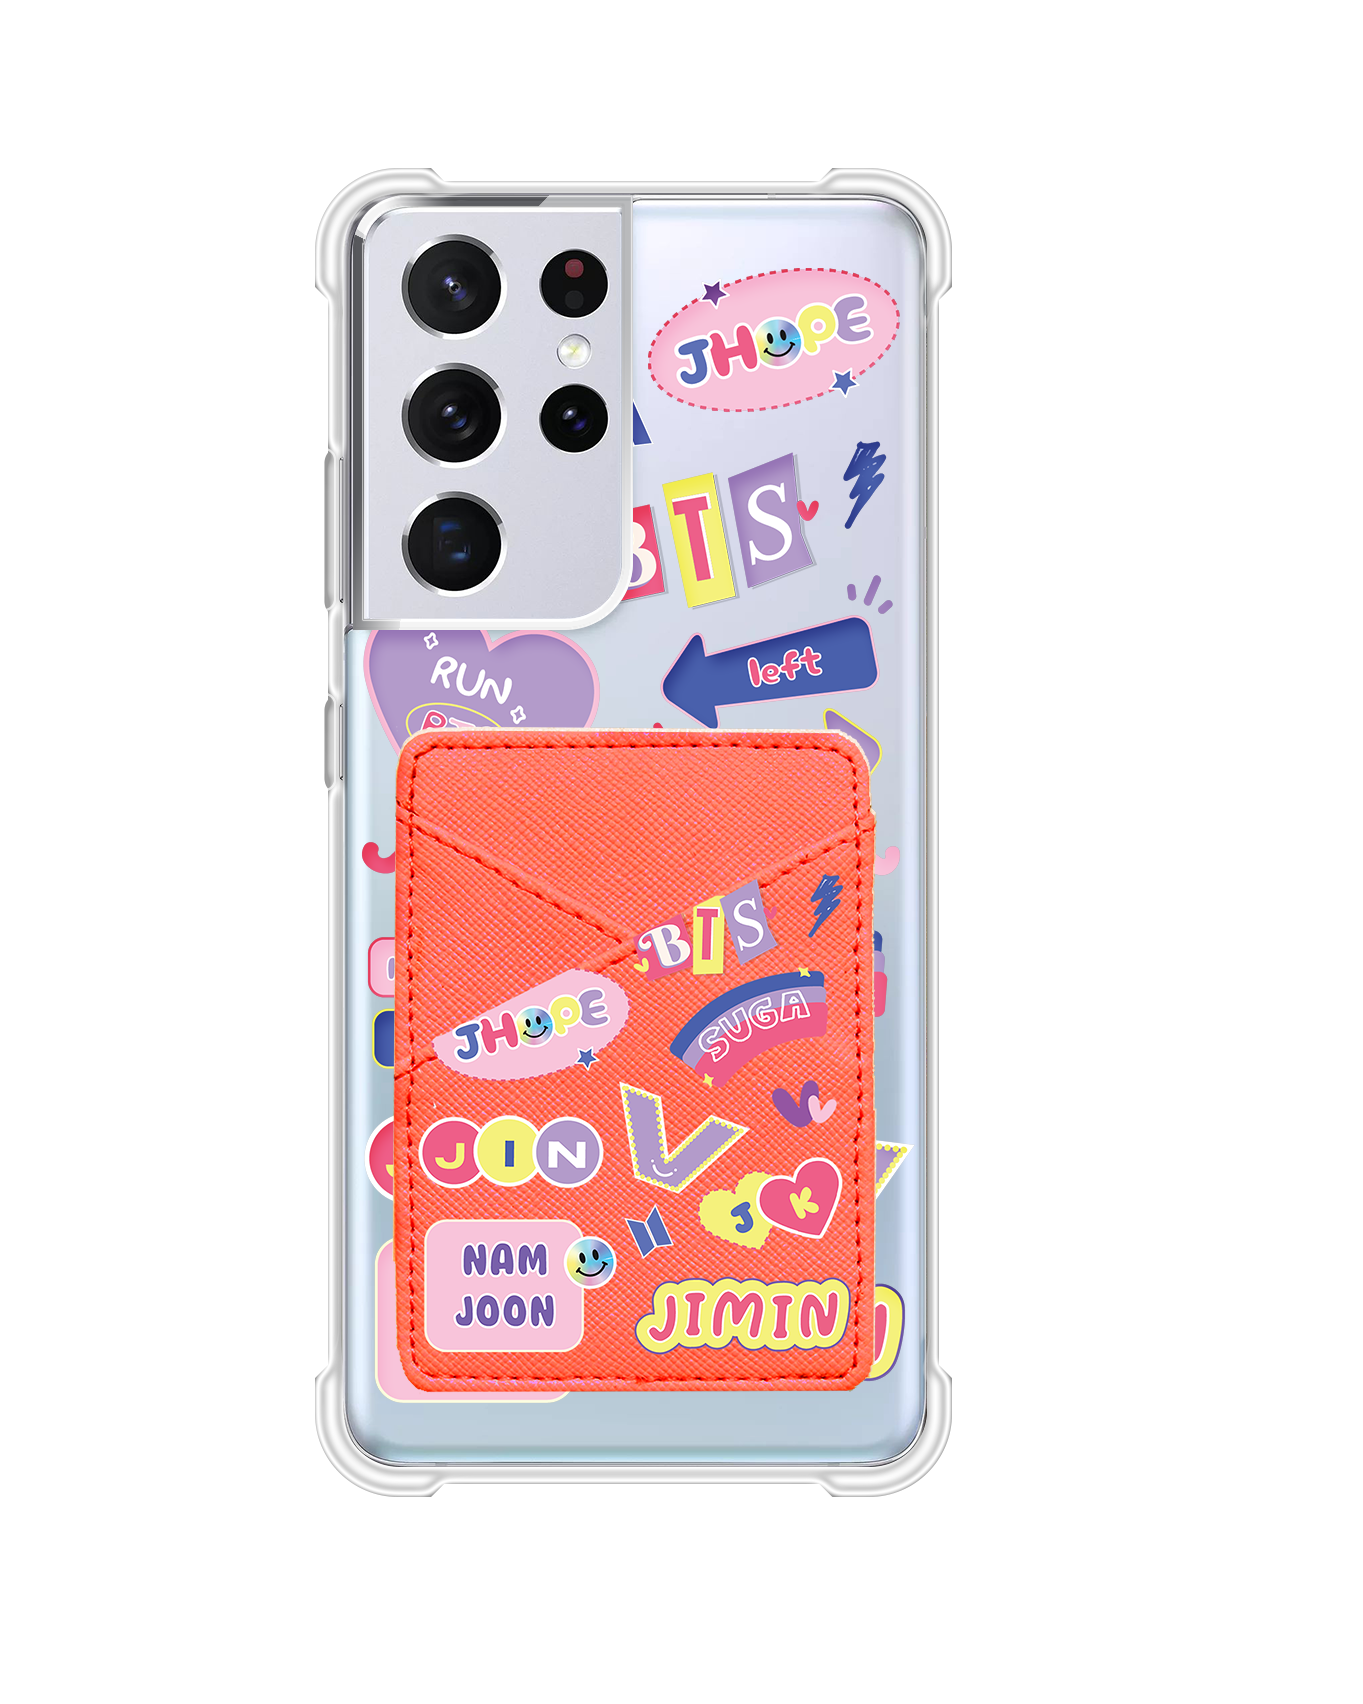 Android Phone Wallet Case - BTS Members